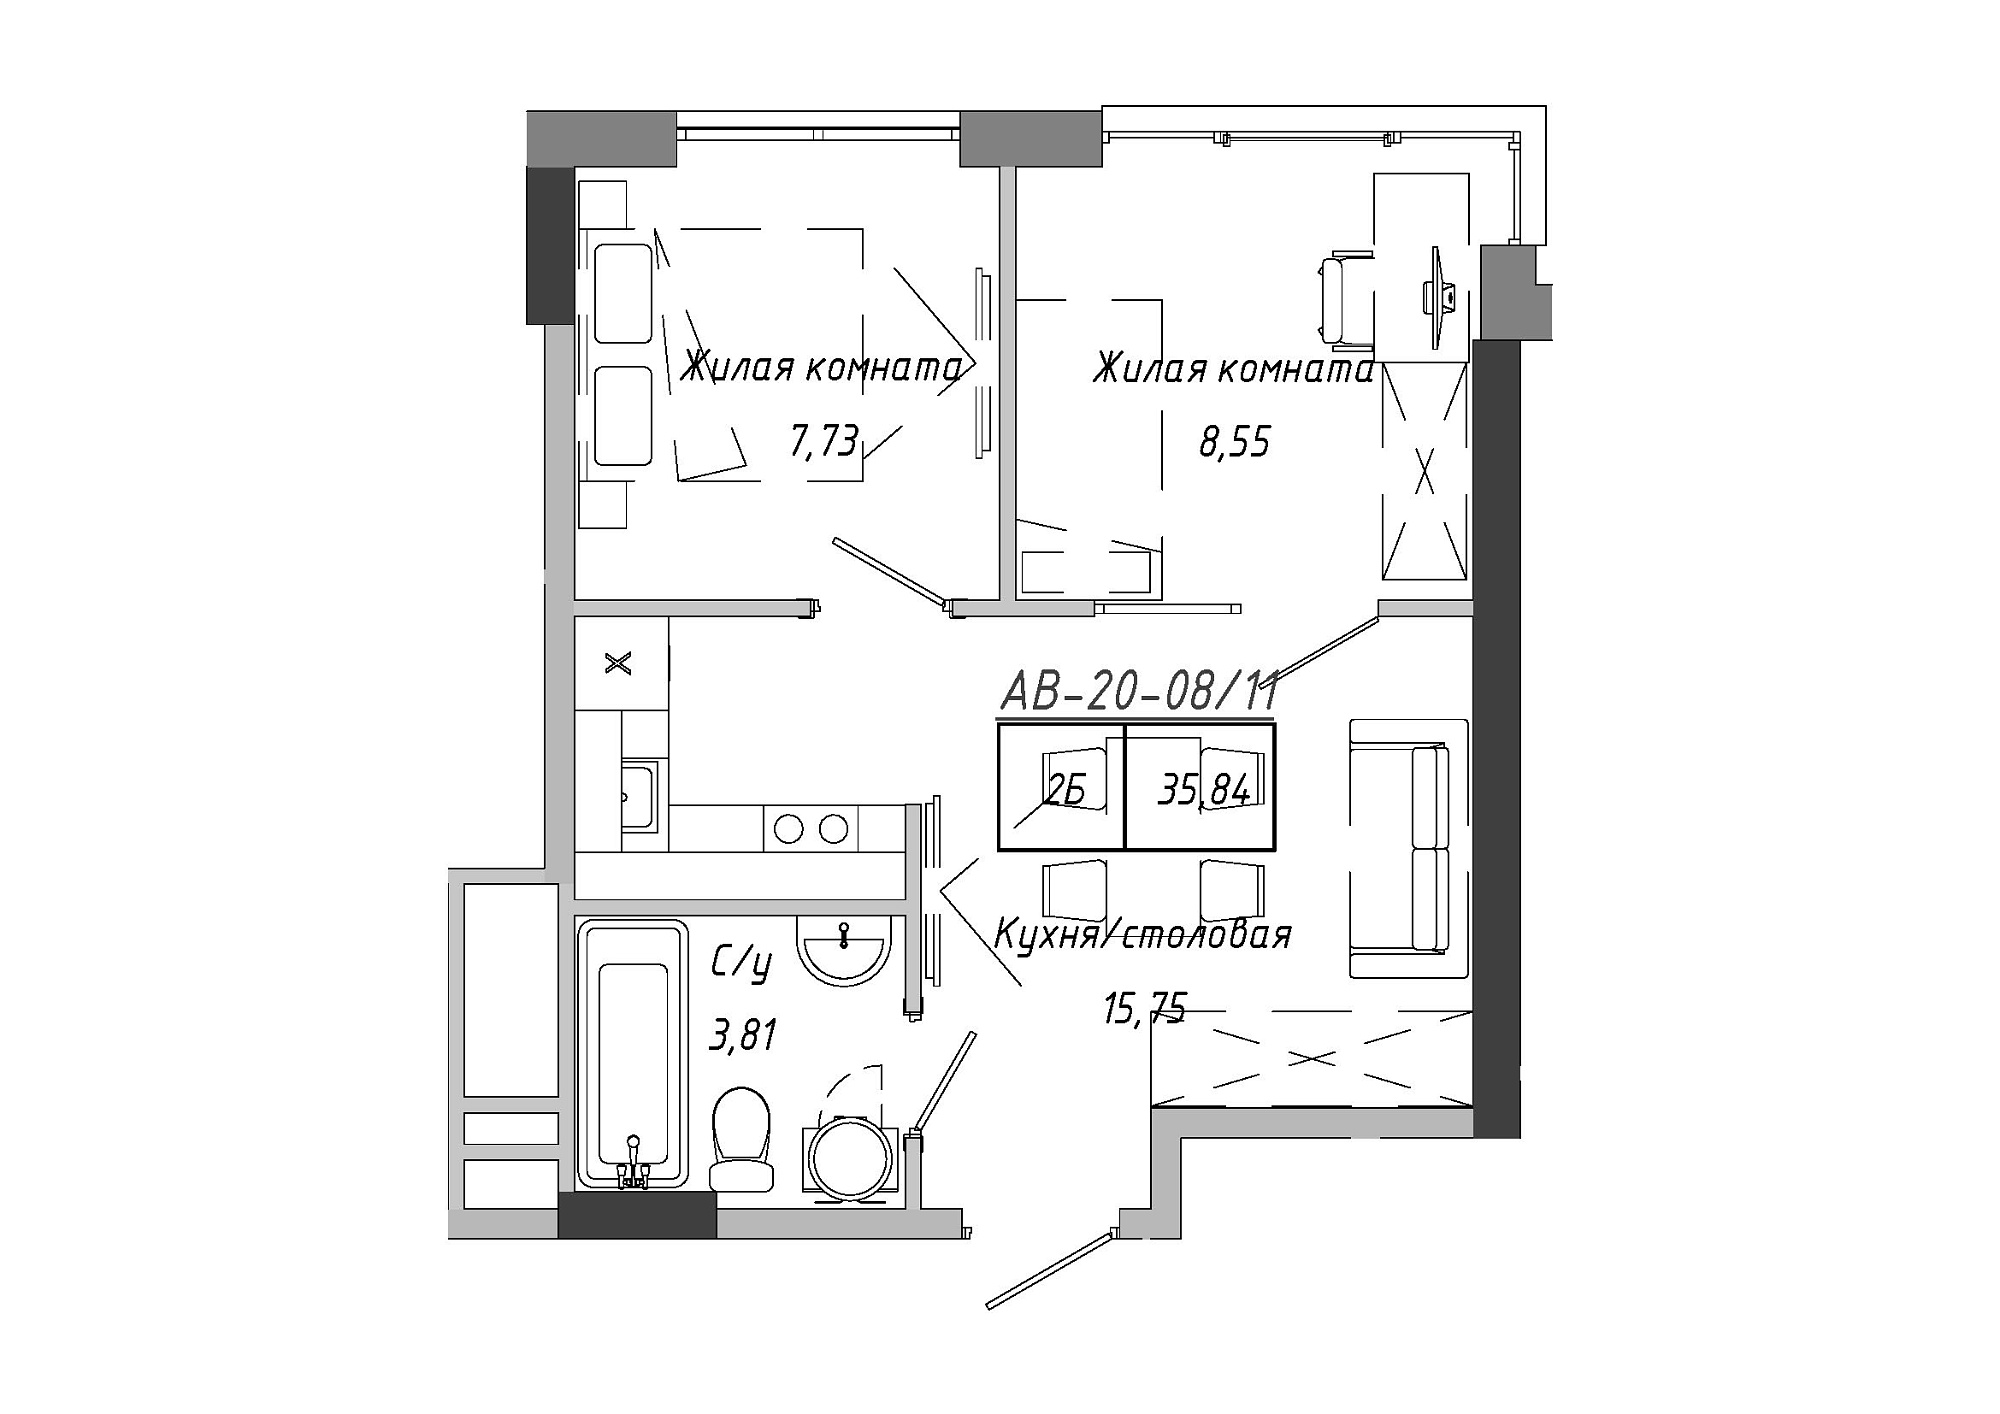 Planning 2-rm flats area 36.12m2, AB-20-08/00011.